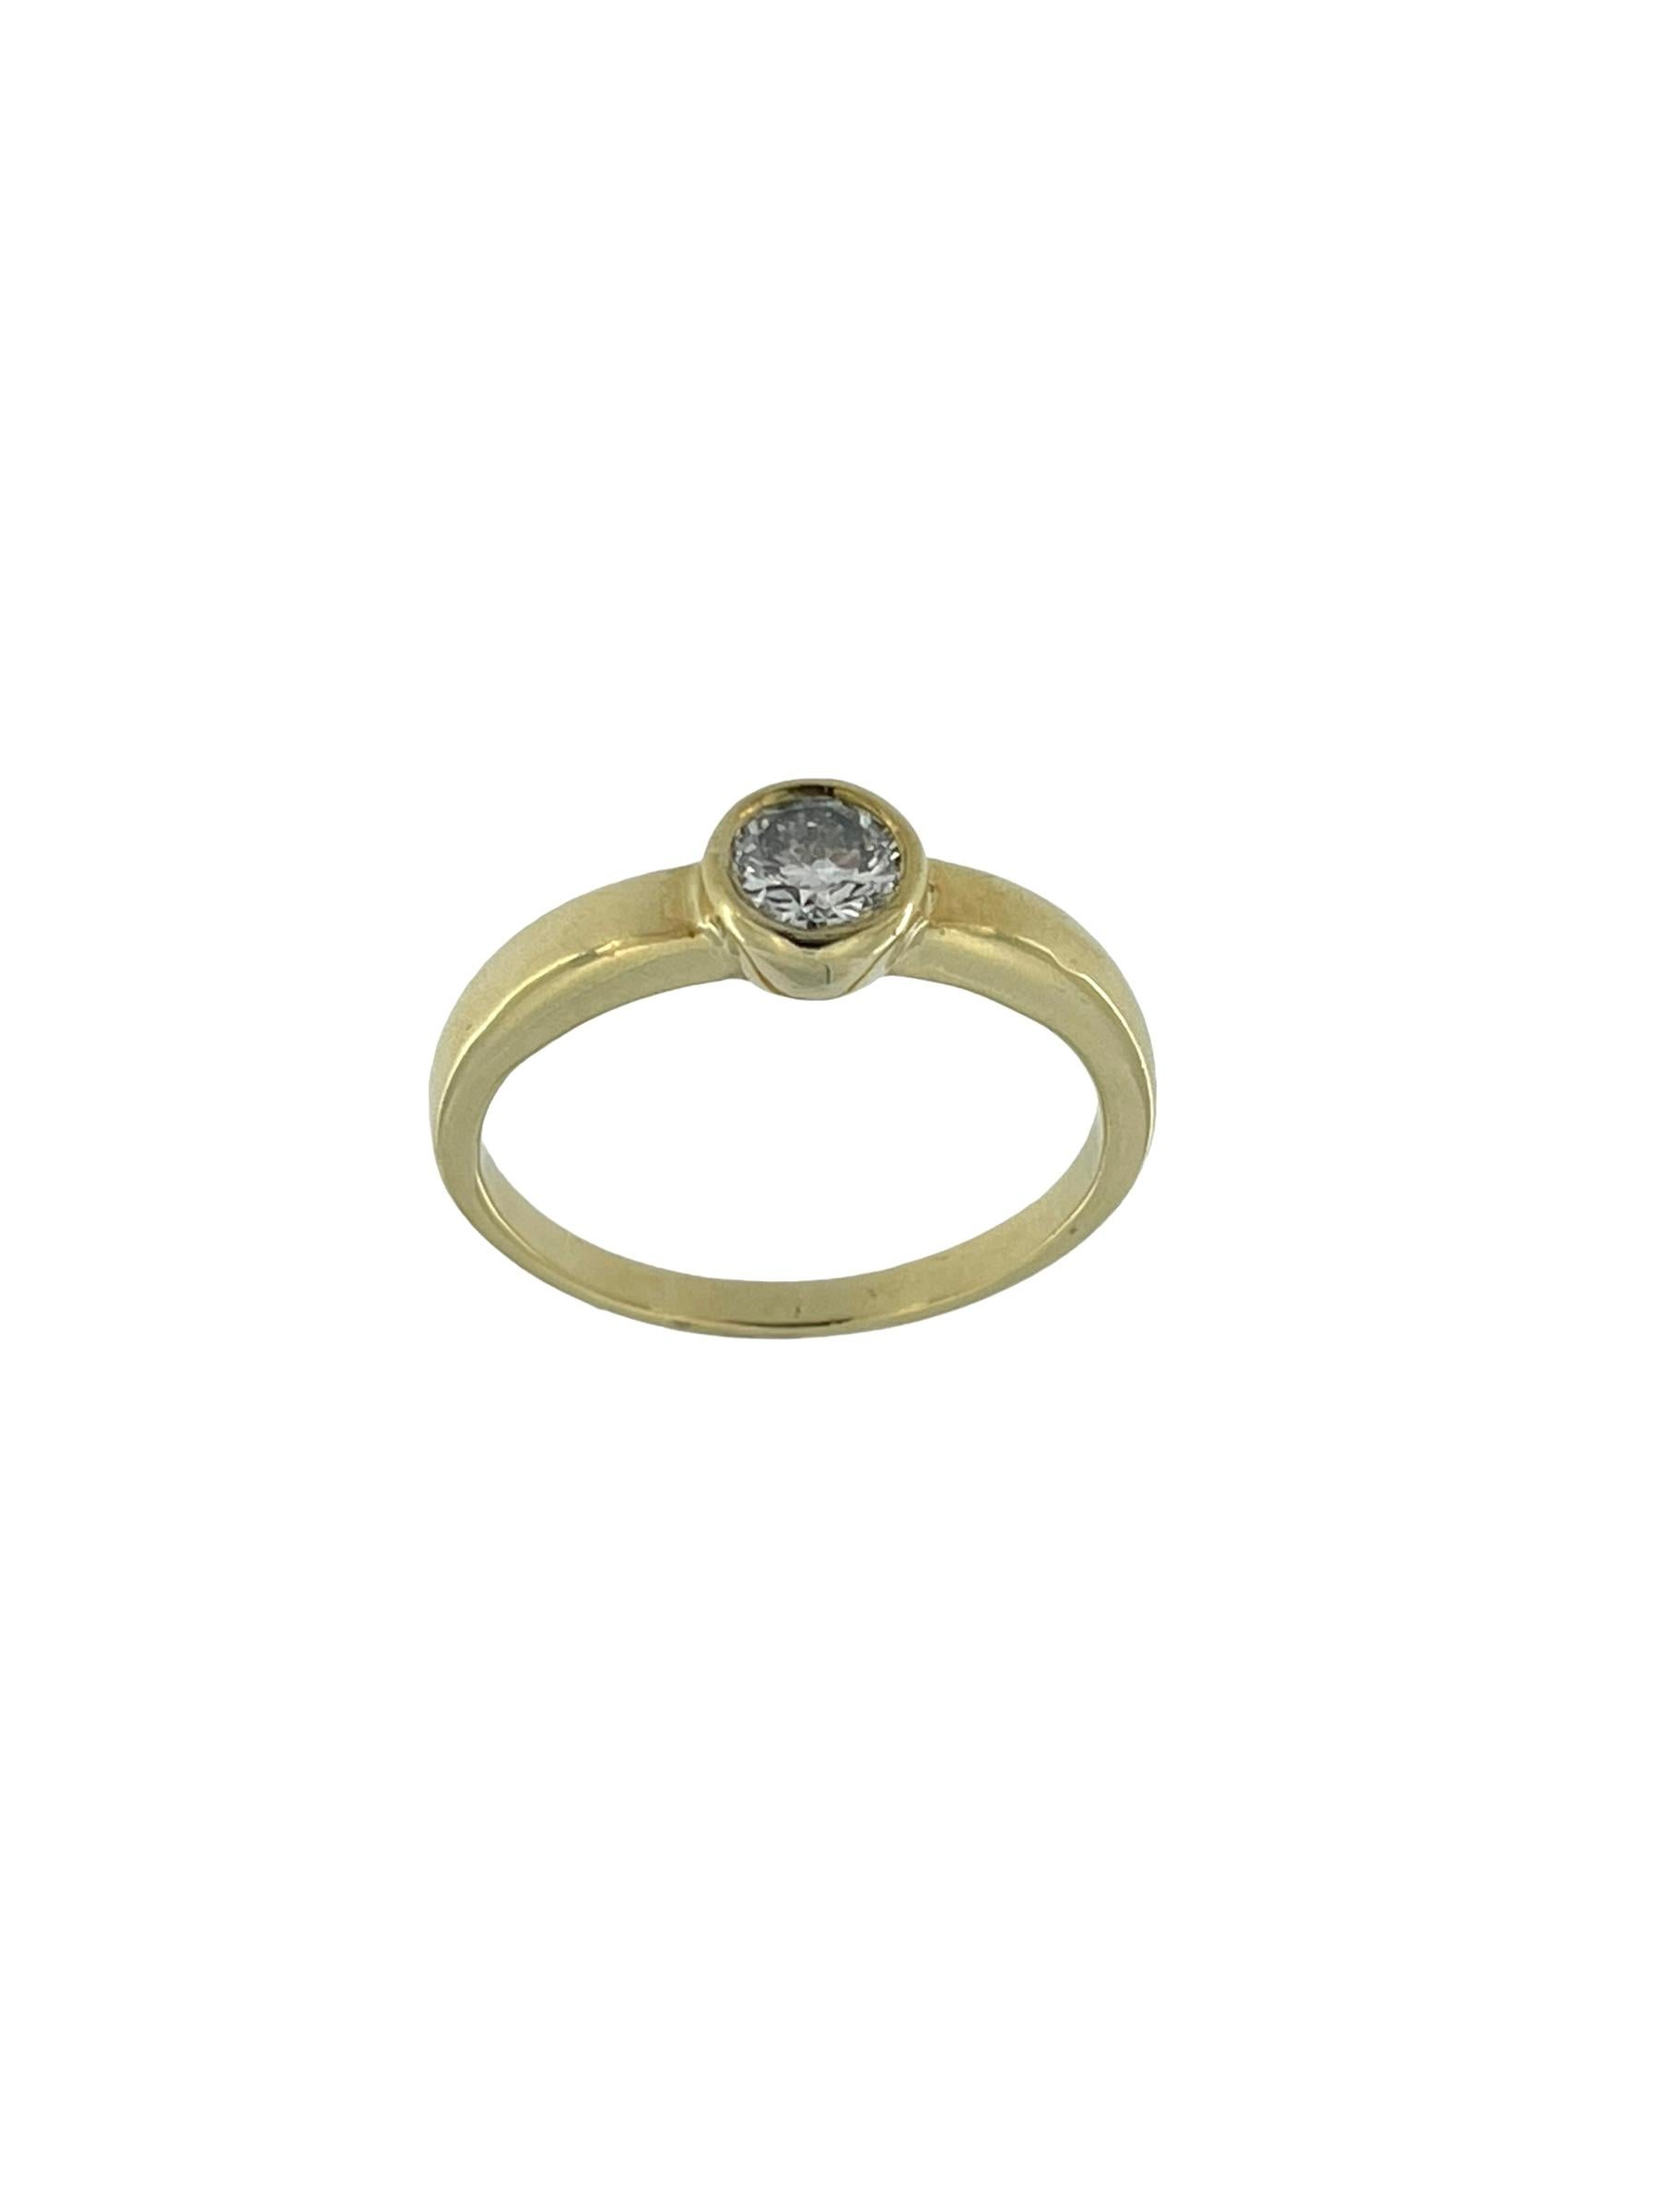 Modern HRD Certified Yellow Gold Diamond Engagement Ring For Sale